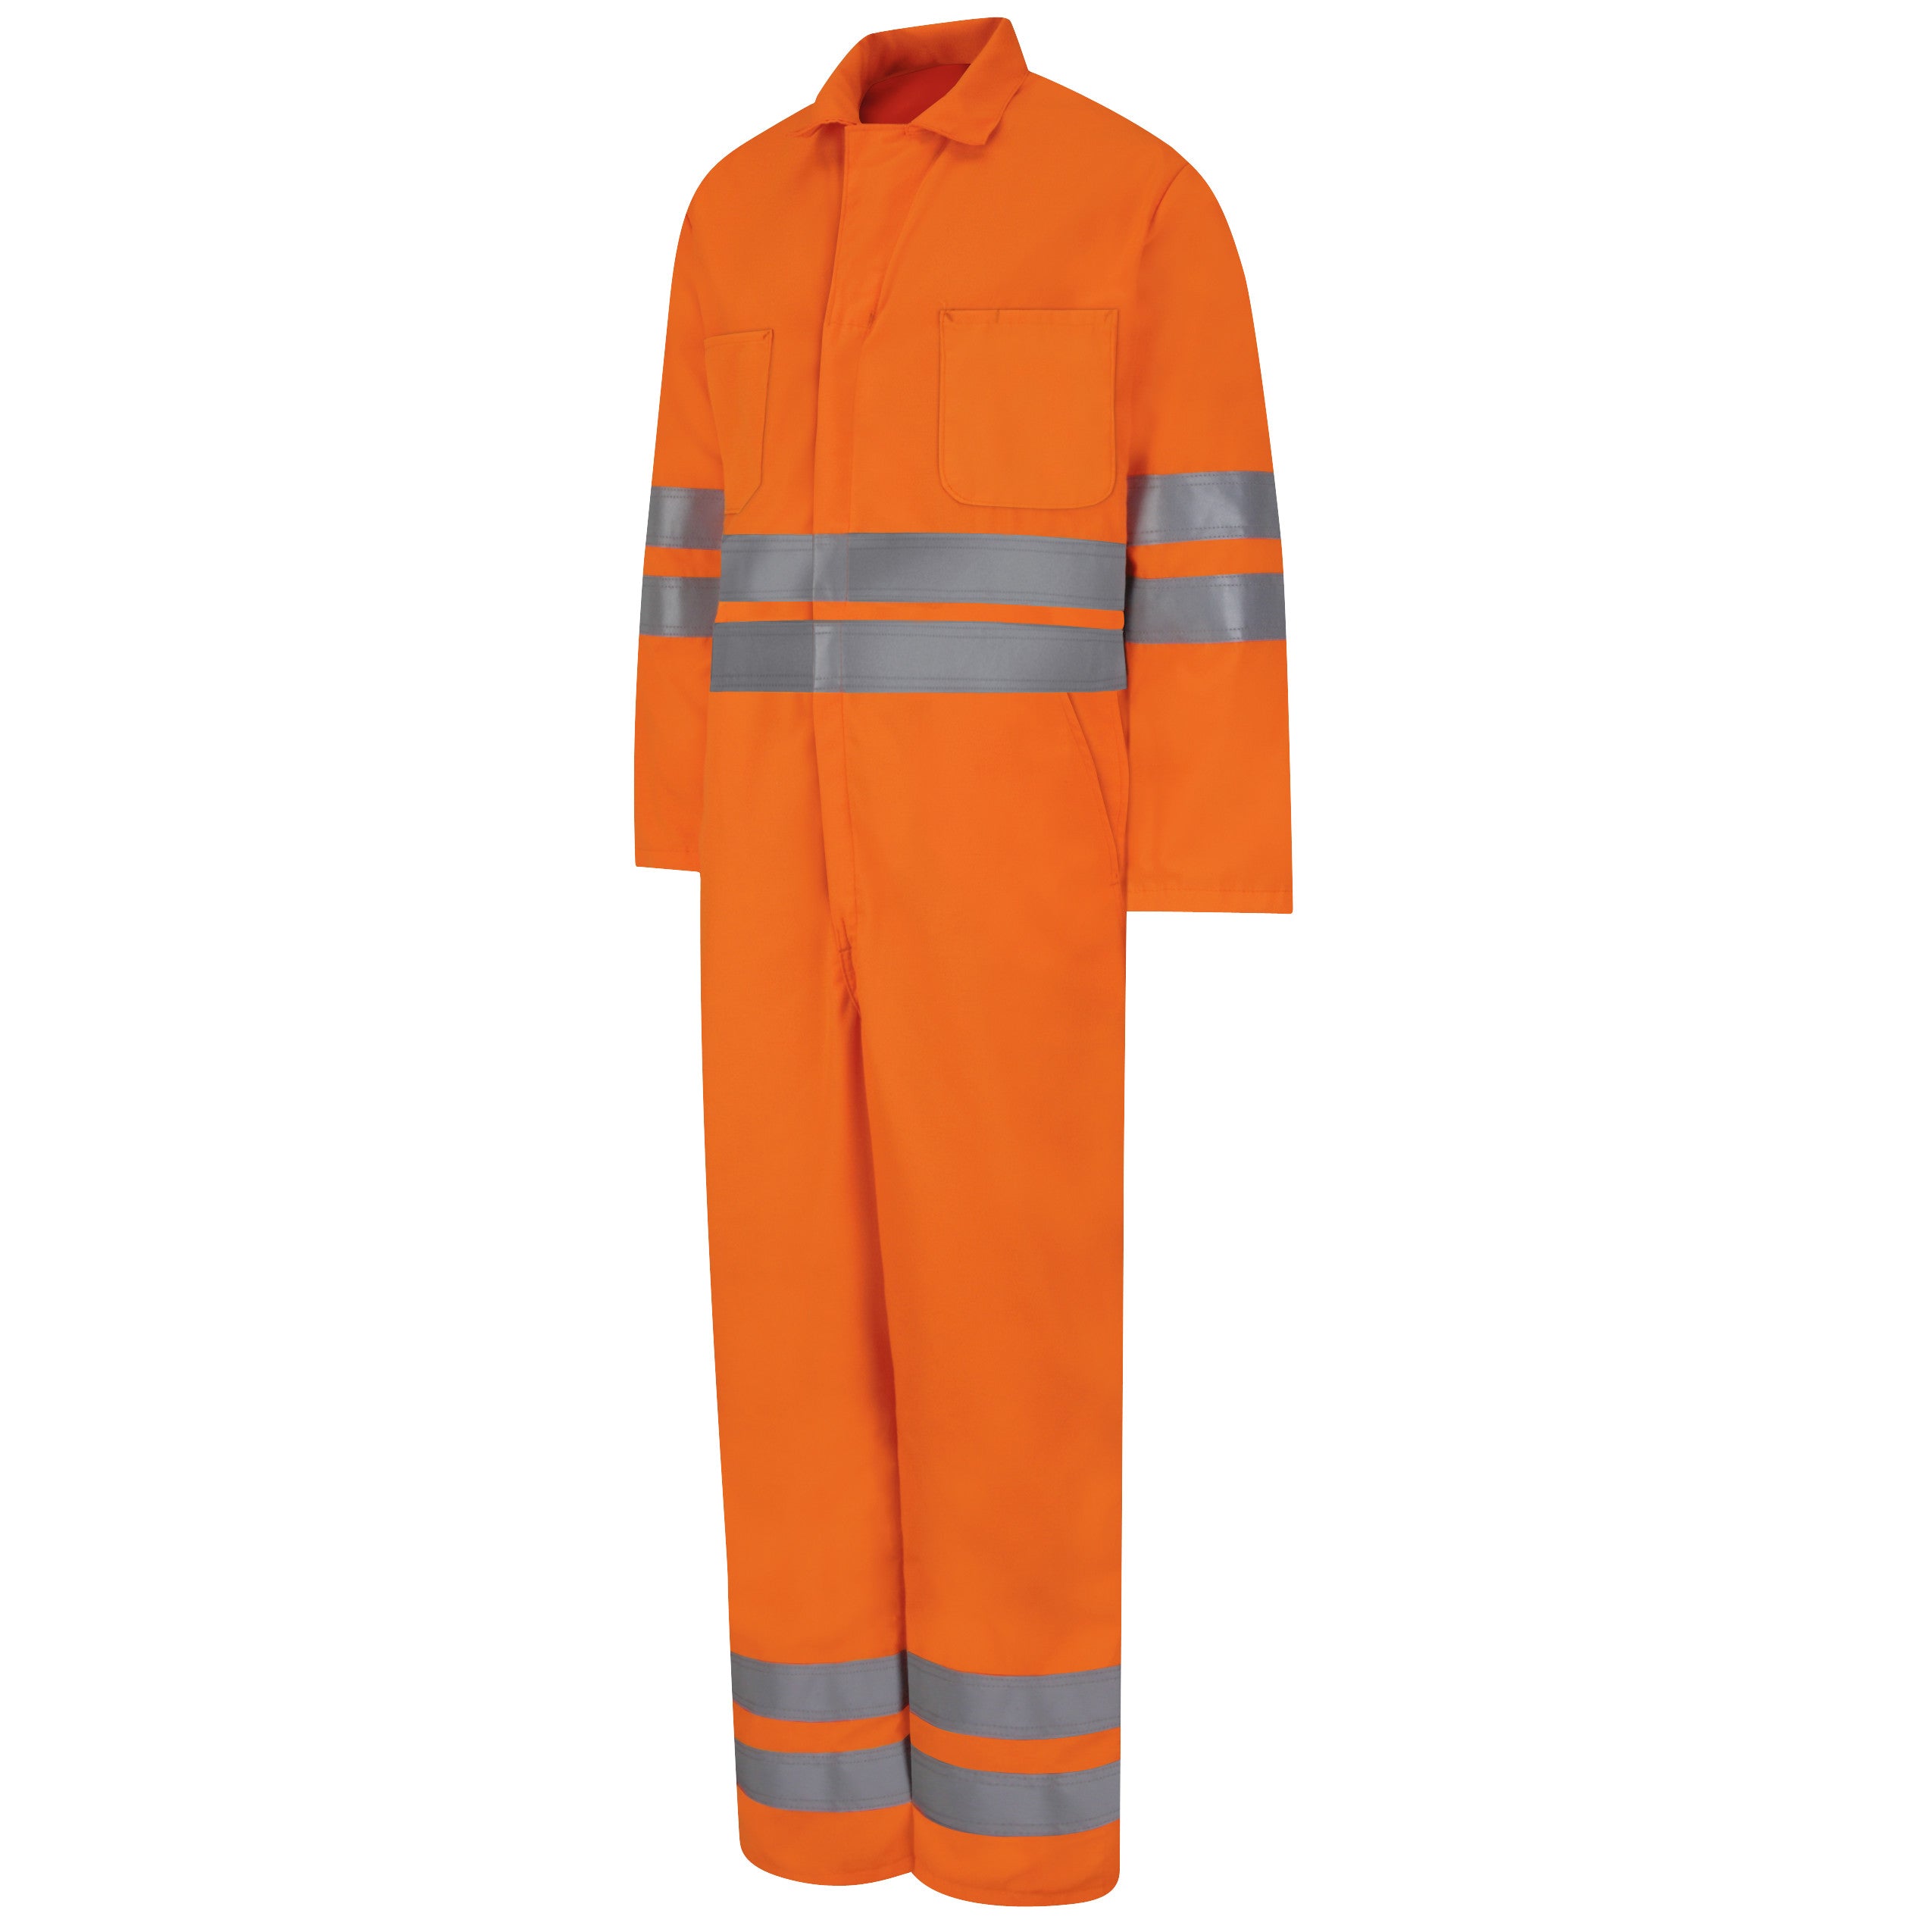 Red Kap Hi-Visibility Zip-Front Coverall